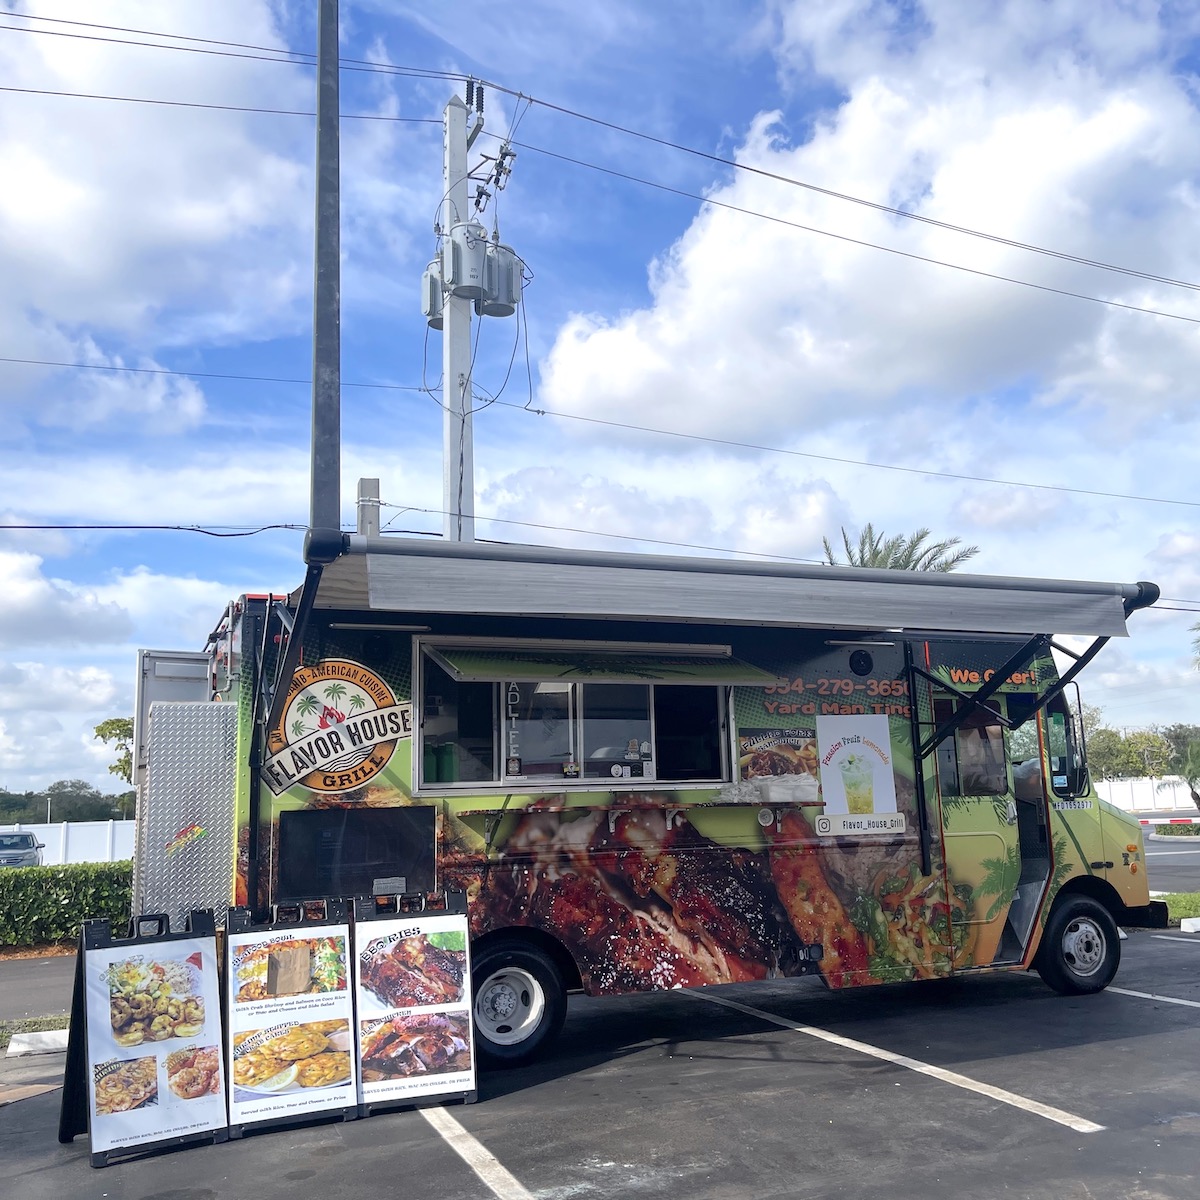 Flavor House Grill Food Truck